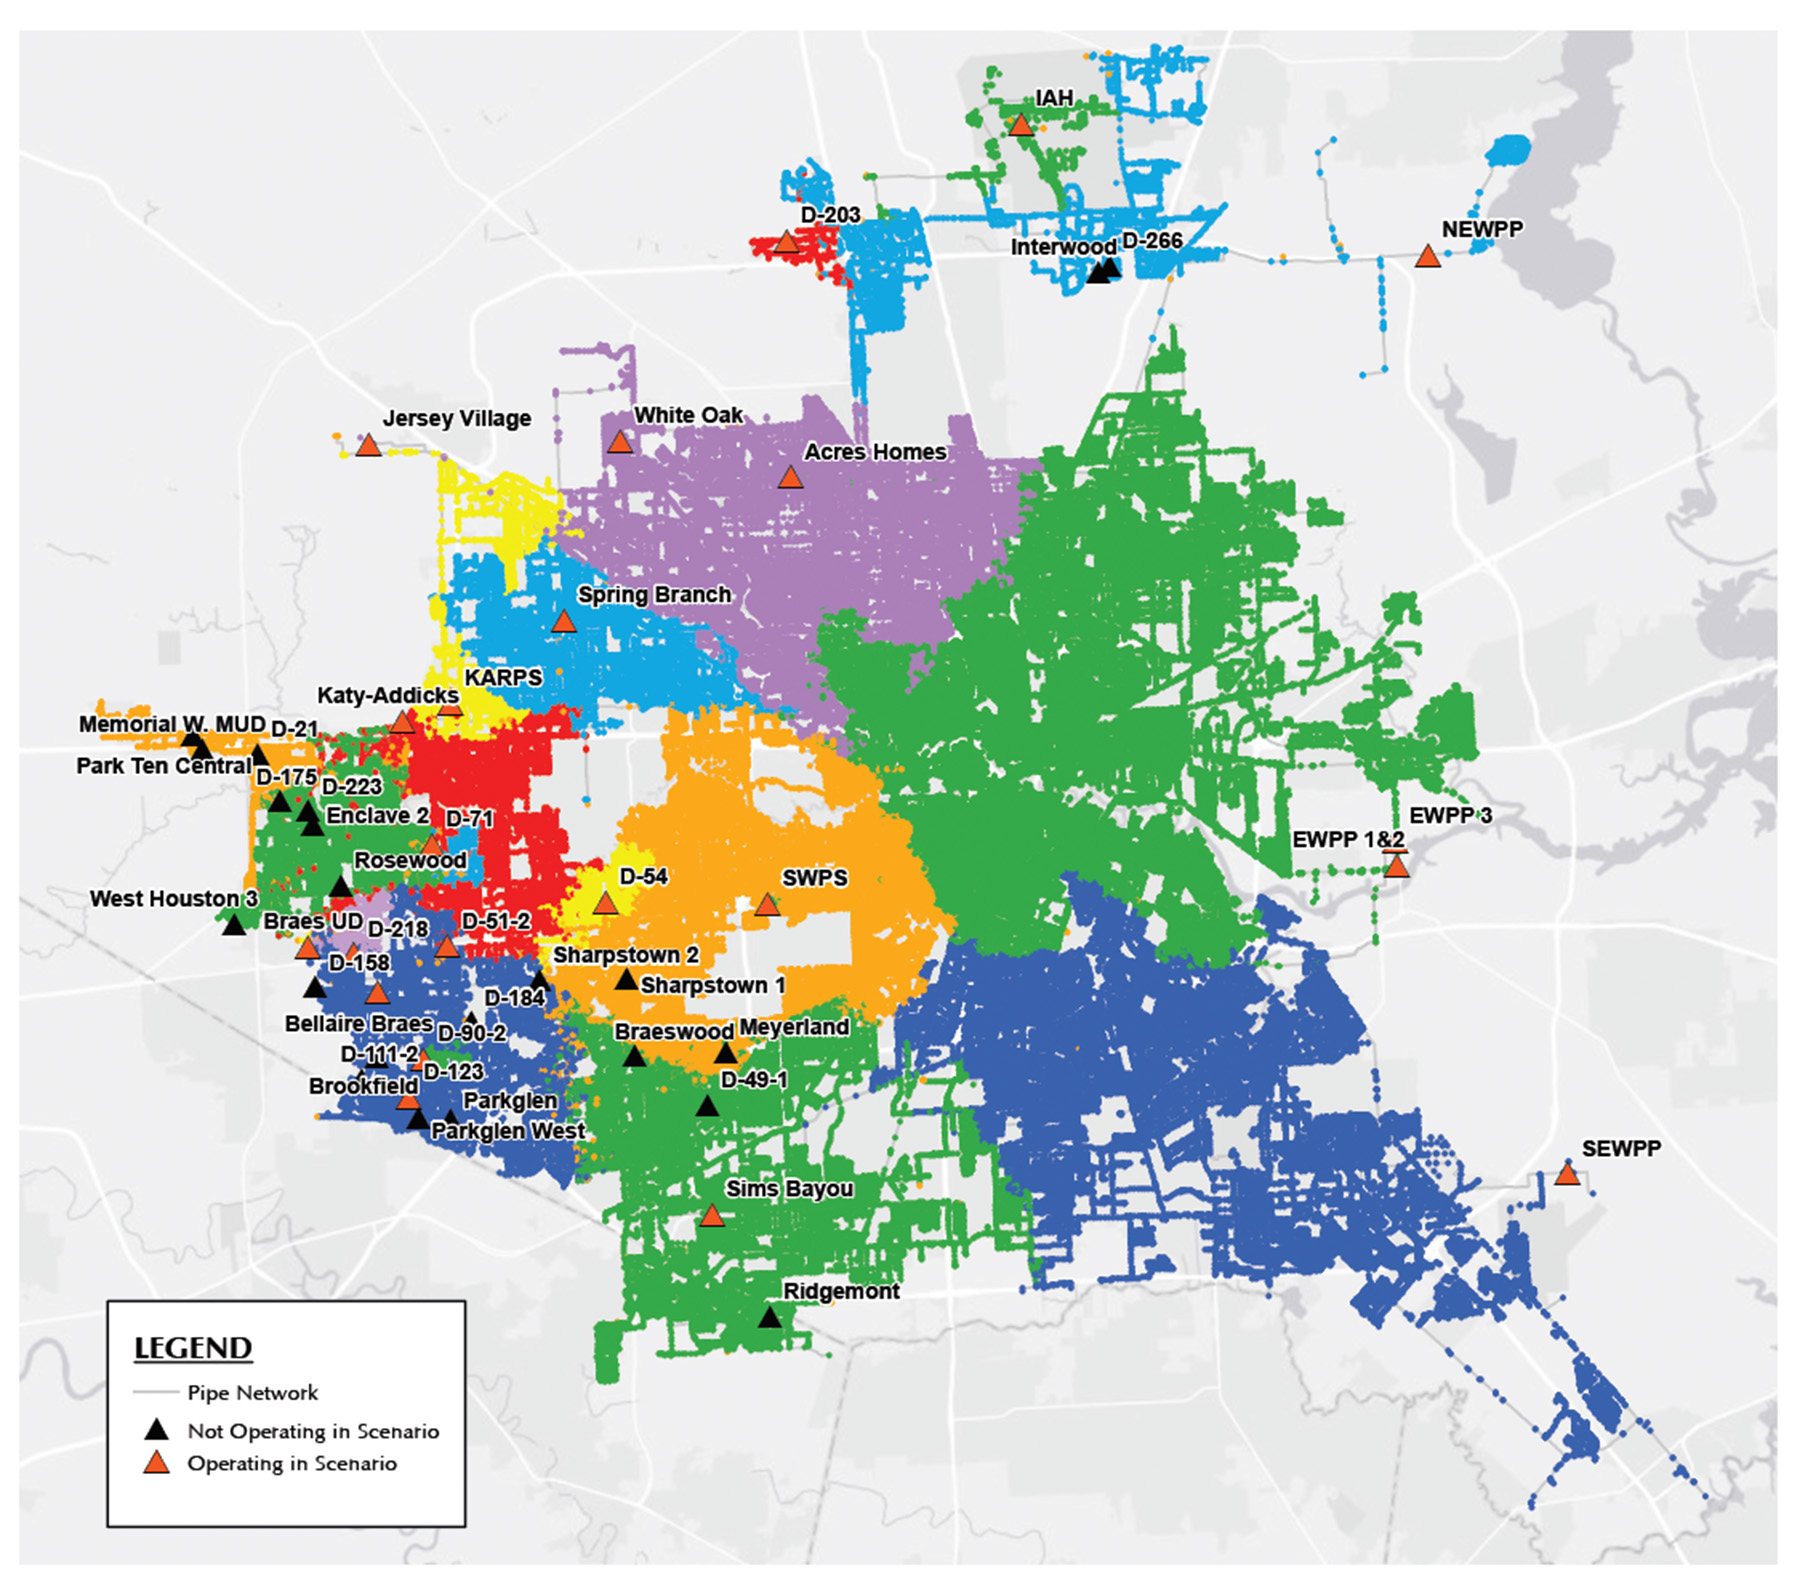 digital twin map of Houston’s water pipes divided by regions that shows which pipes are in service and which are not